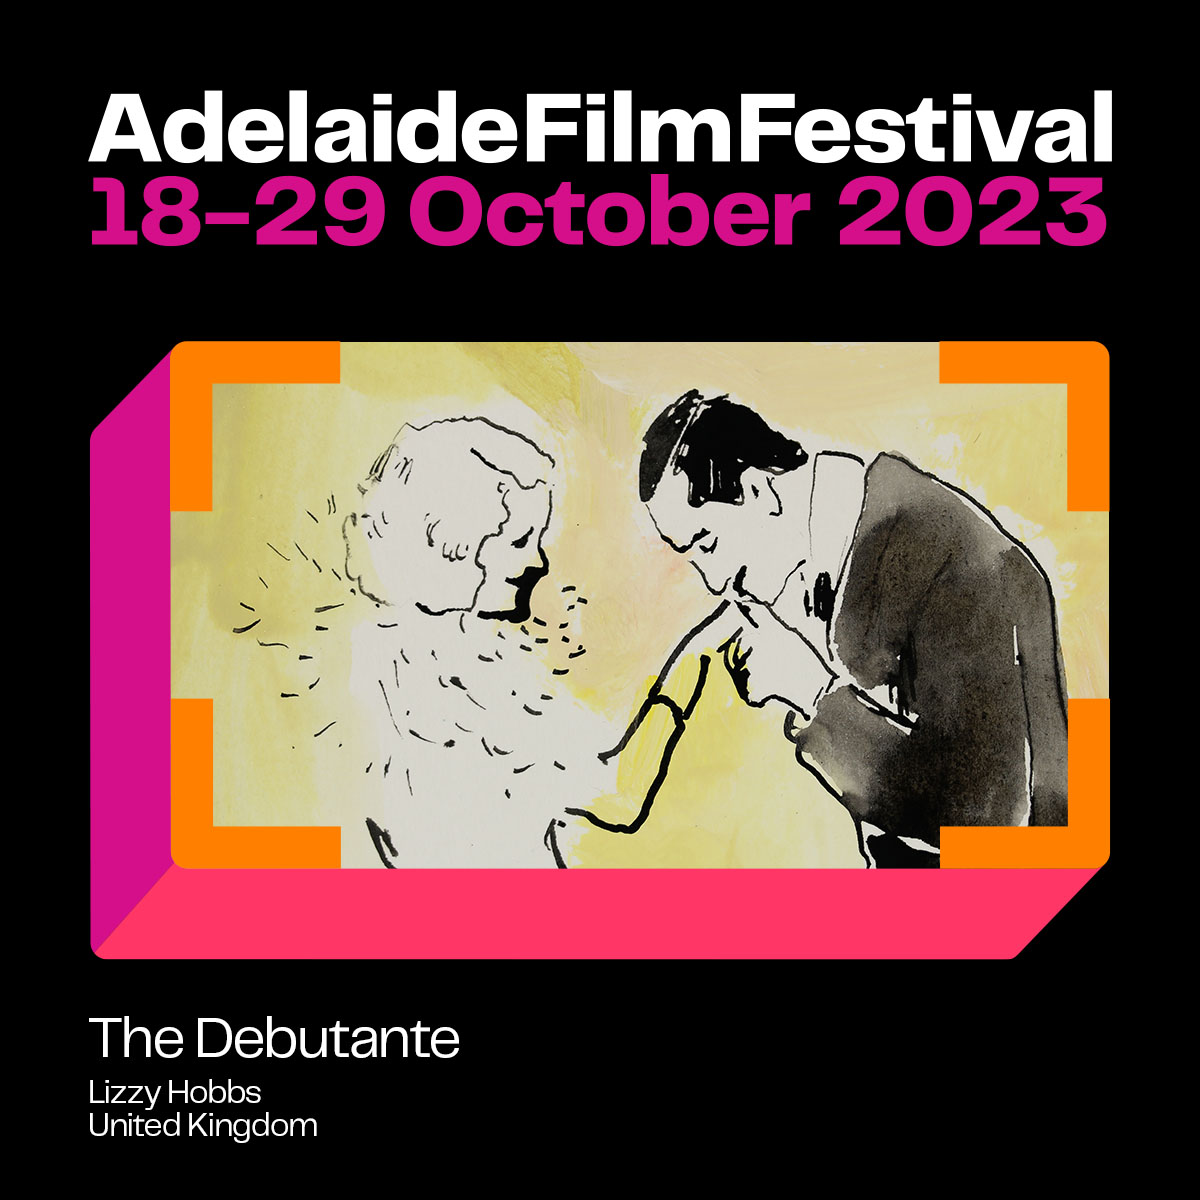 📢Exciting news! Our #BFIbacked film 'The Debutante' has been selected for the Adelaide Film Festival on October 26th.📽️🎉 🎟️Get your tickets at: [ adelaidefilmfestival.org/event/the-debu… ] We can't wait to share this special film with you all! Thank you for your support, @AdlFilmFest! 🙏